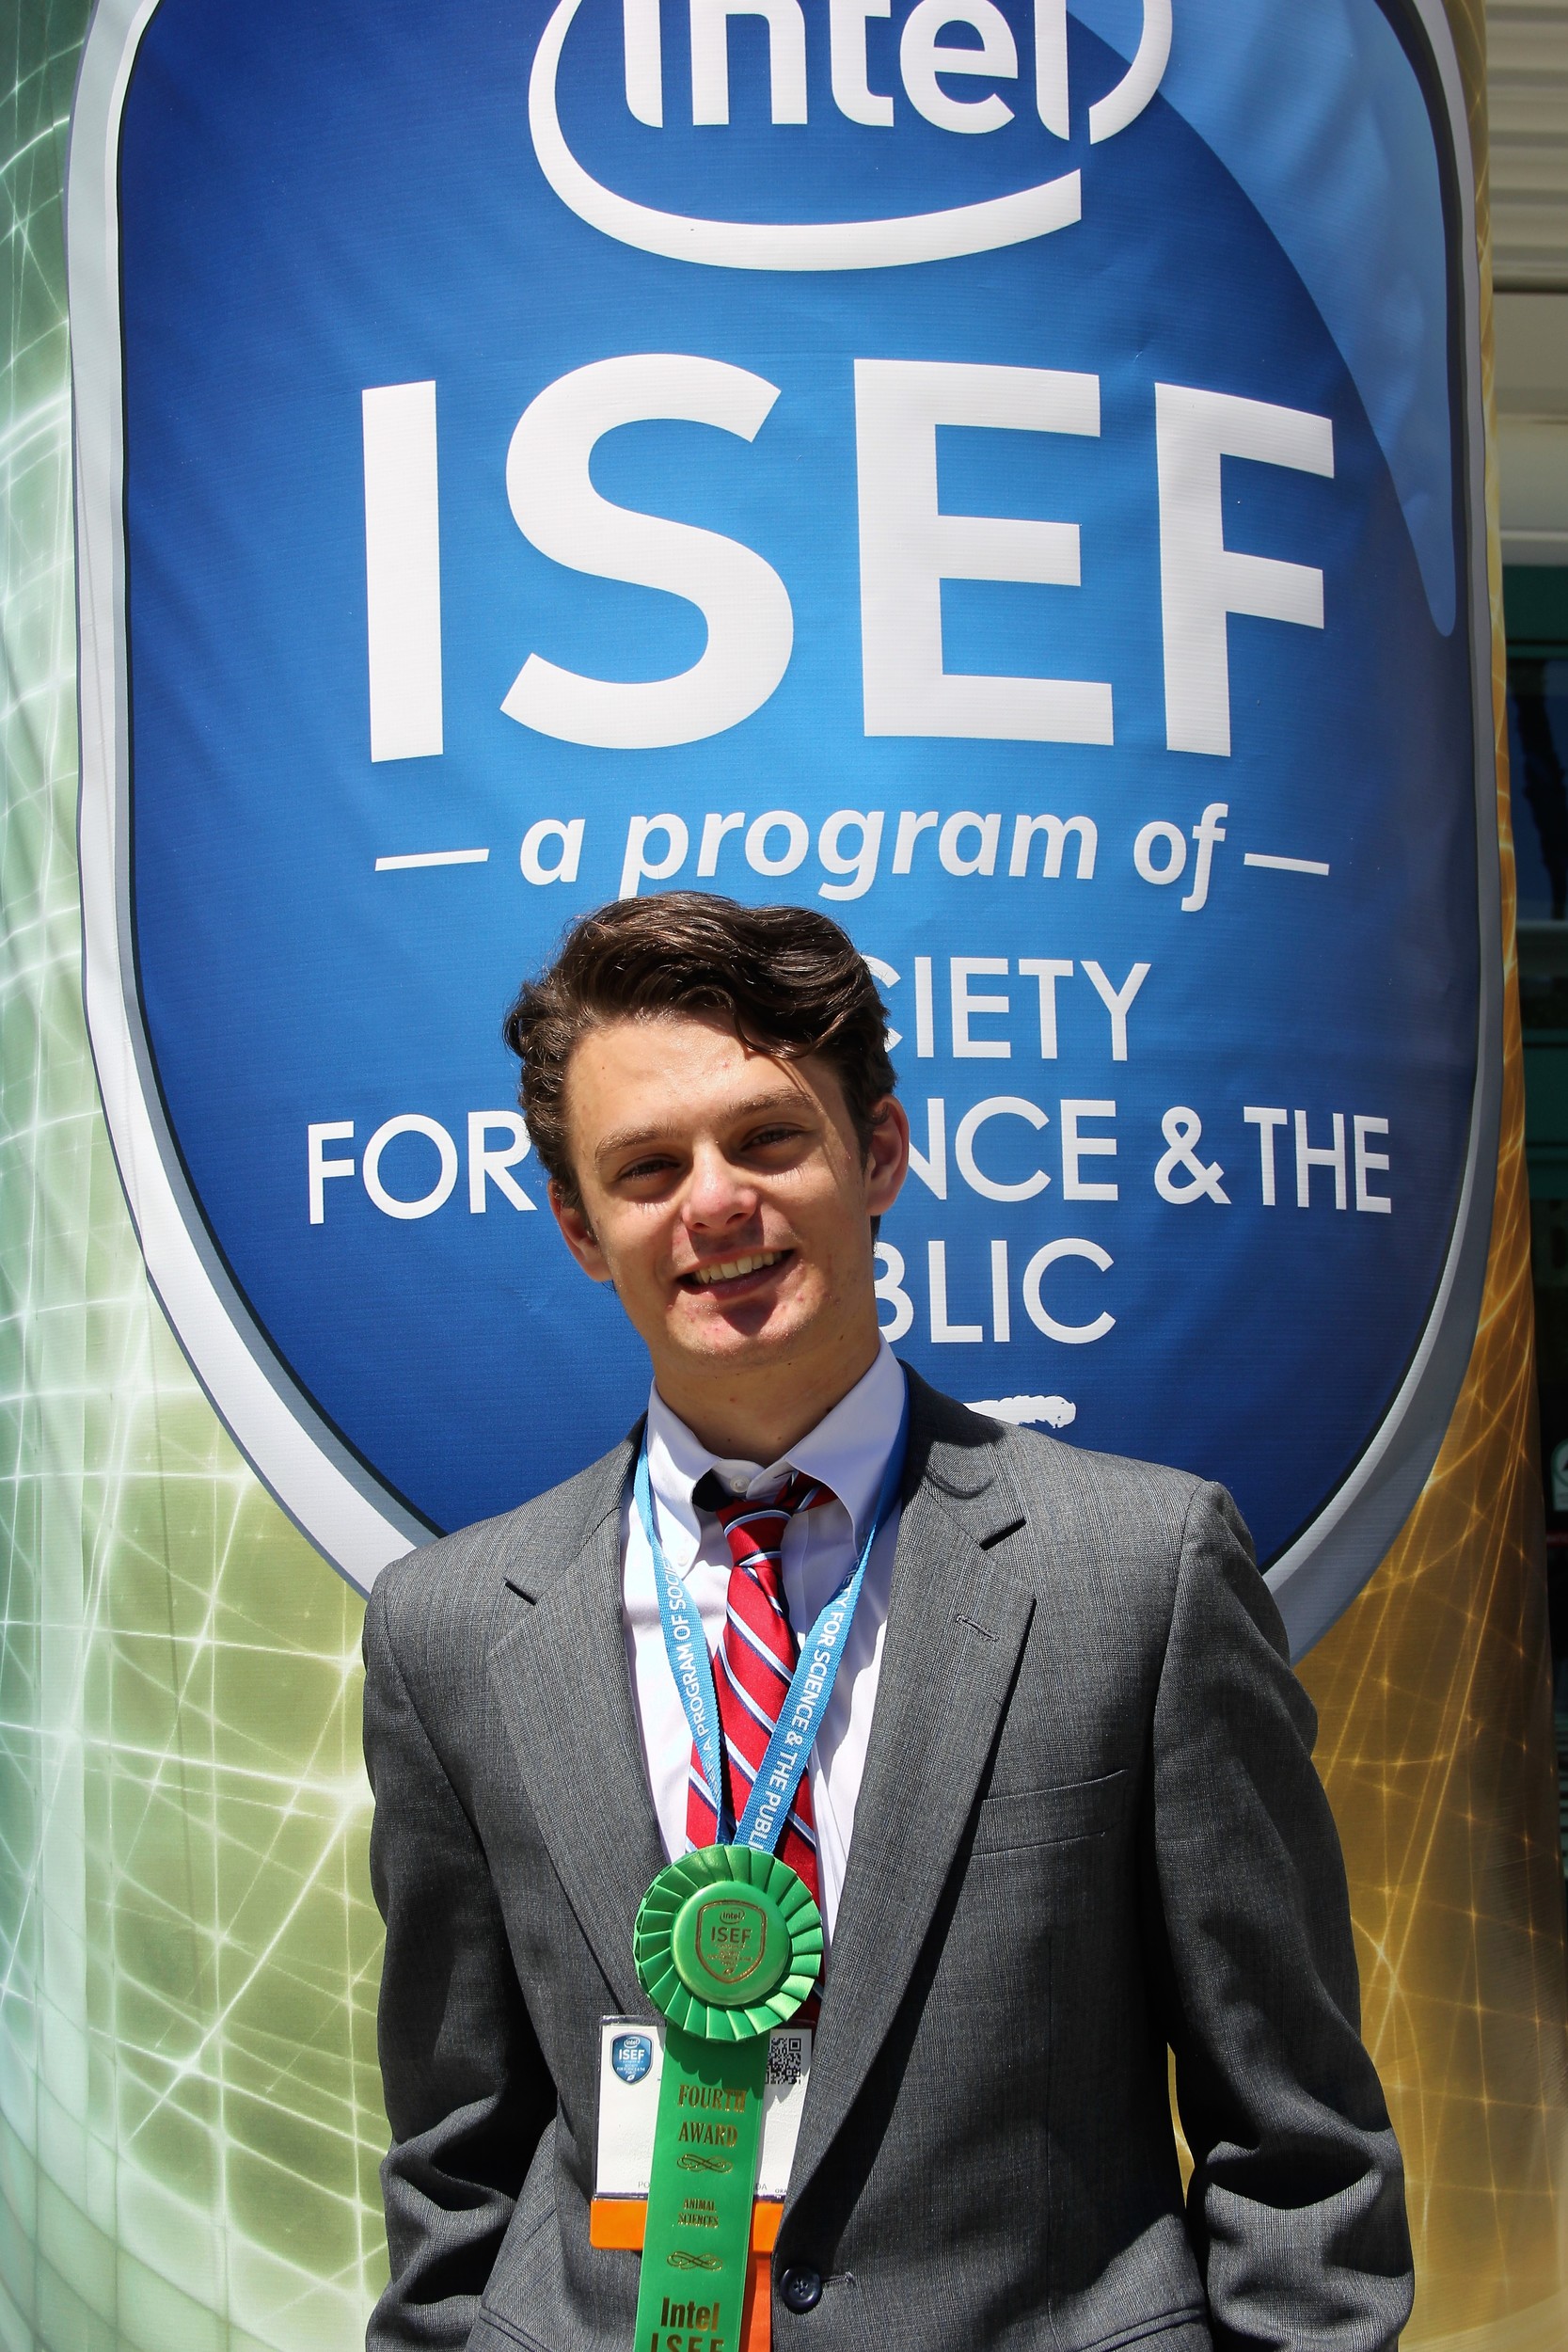 James Staman took fourth place at the Intel International Science and Engineering Fair in Los Angeles in May.